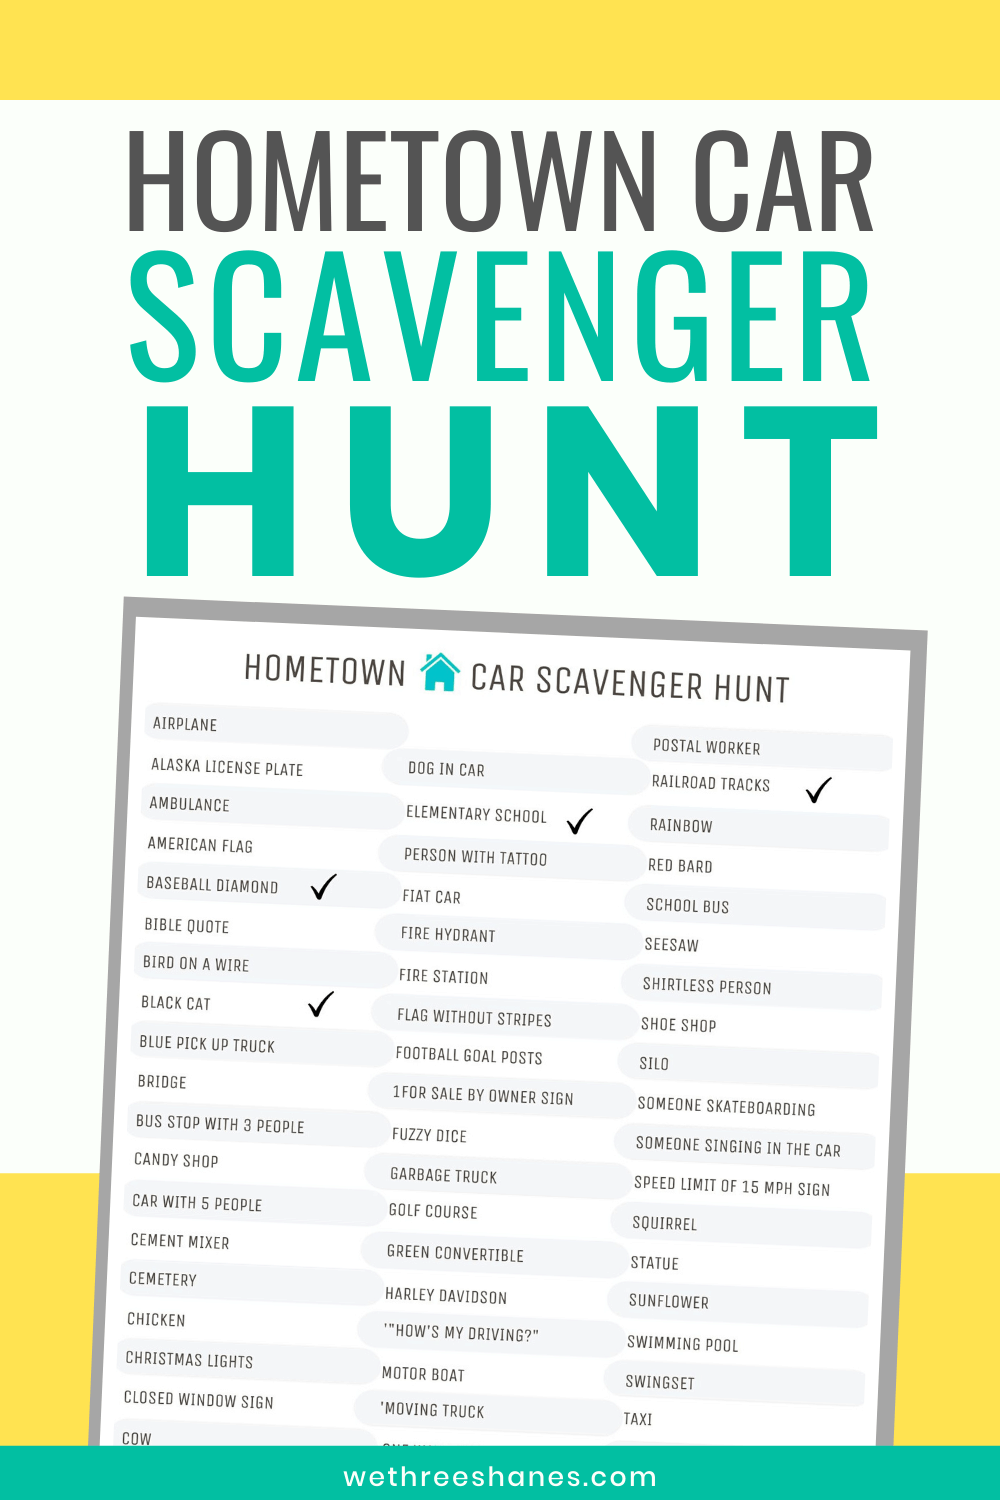 Have a fun car scavenger hunt competition with friends. Great for teens and adults. Free printable instant download. | We Three Shanes